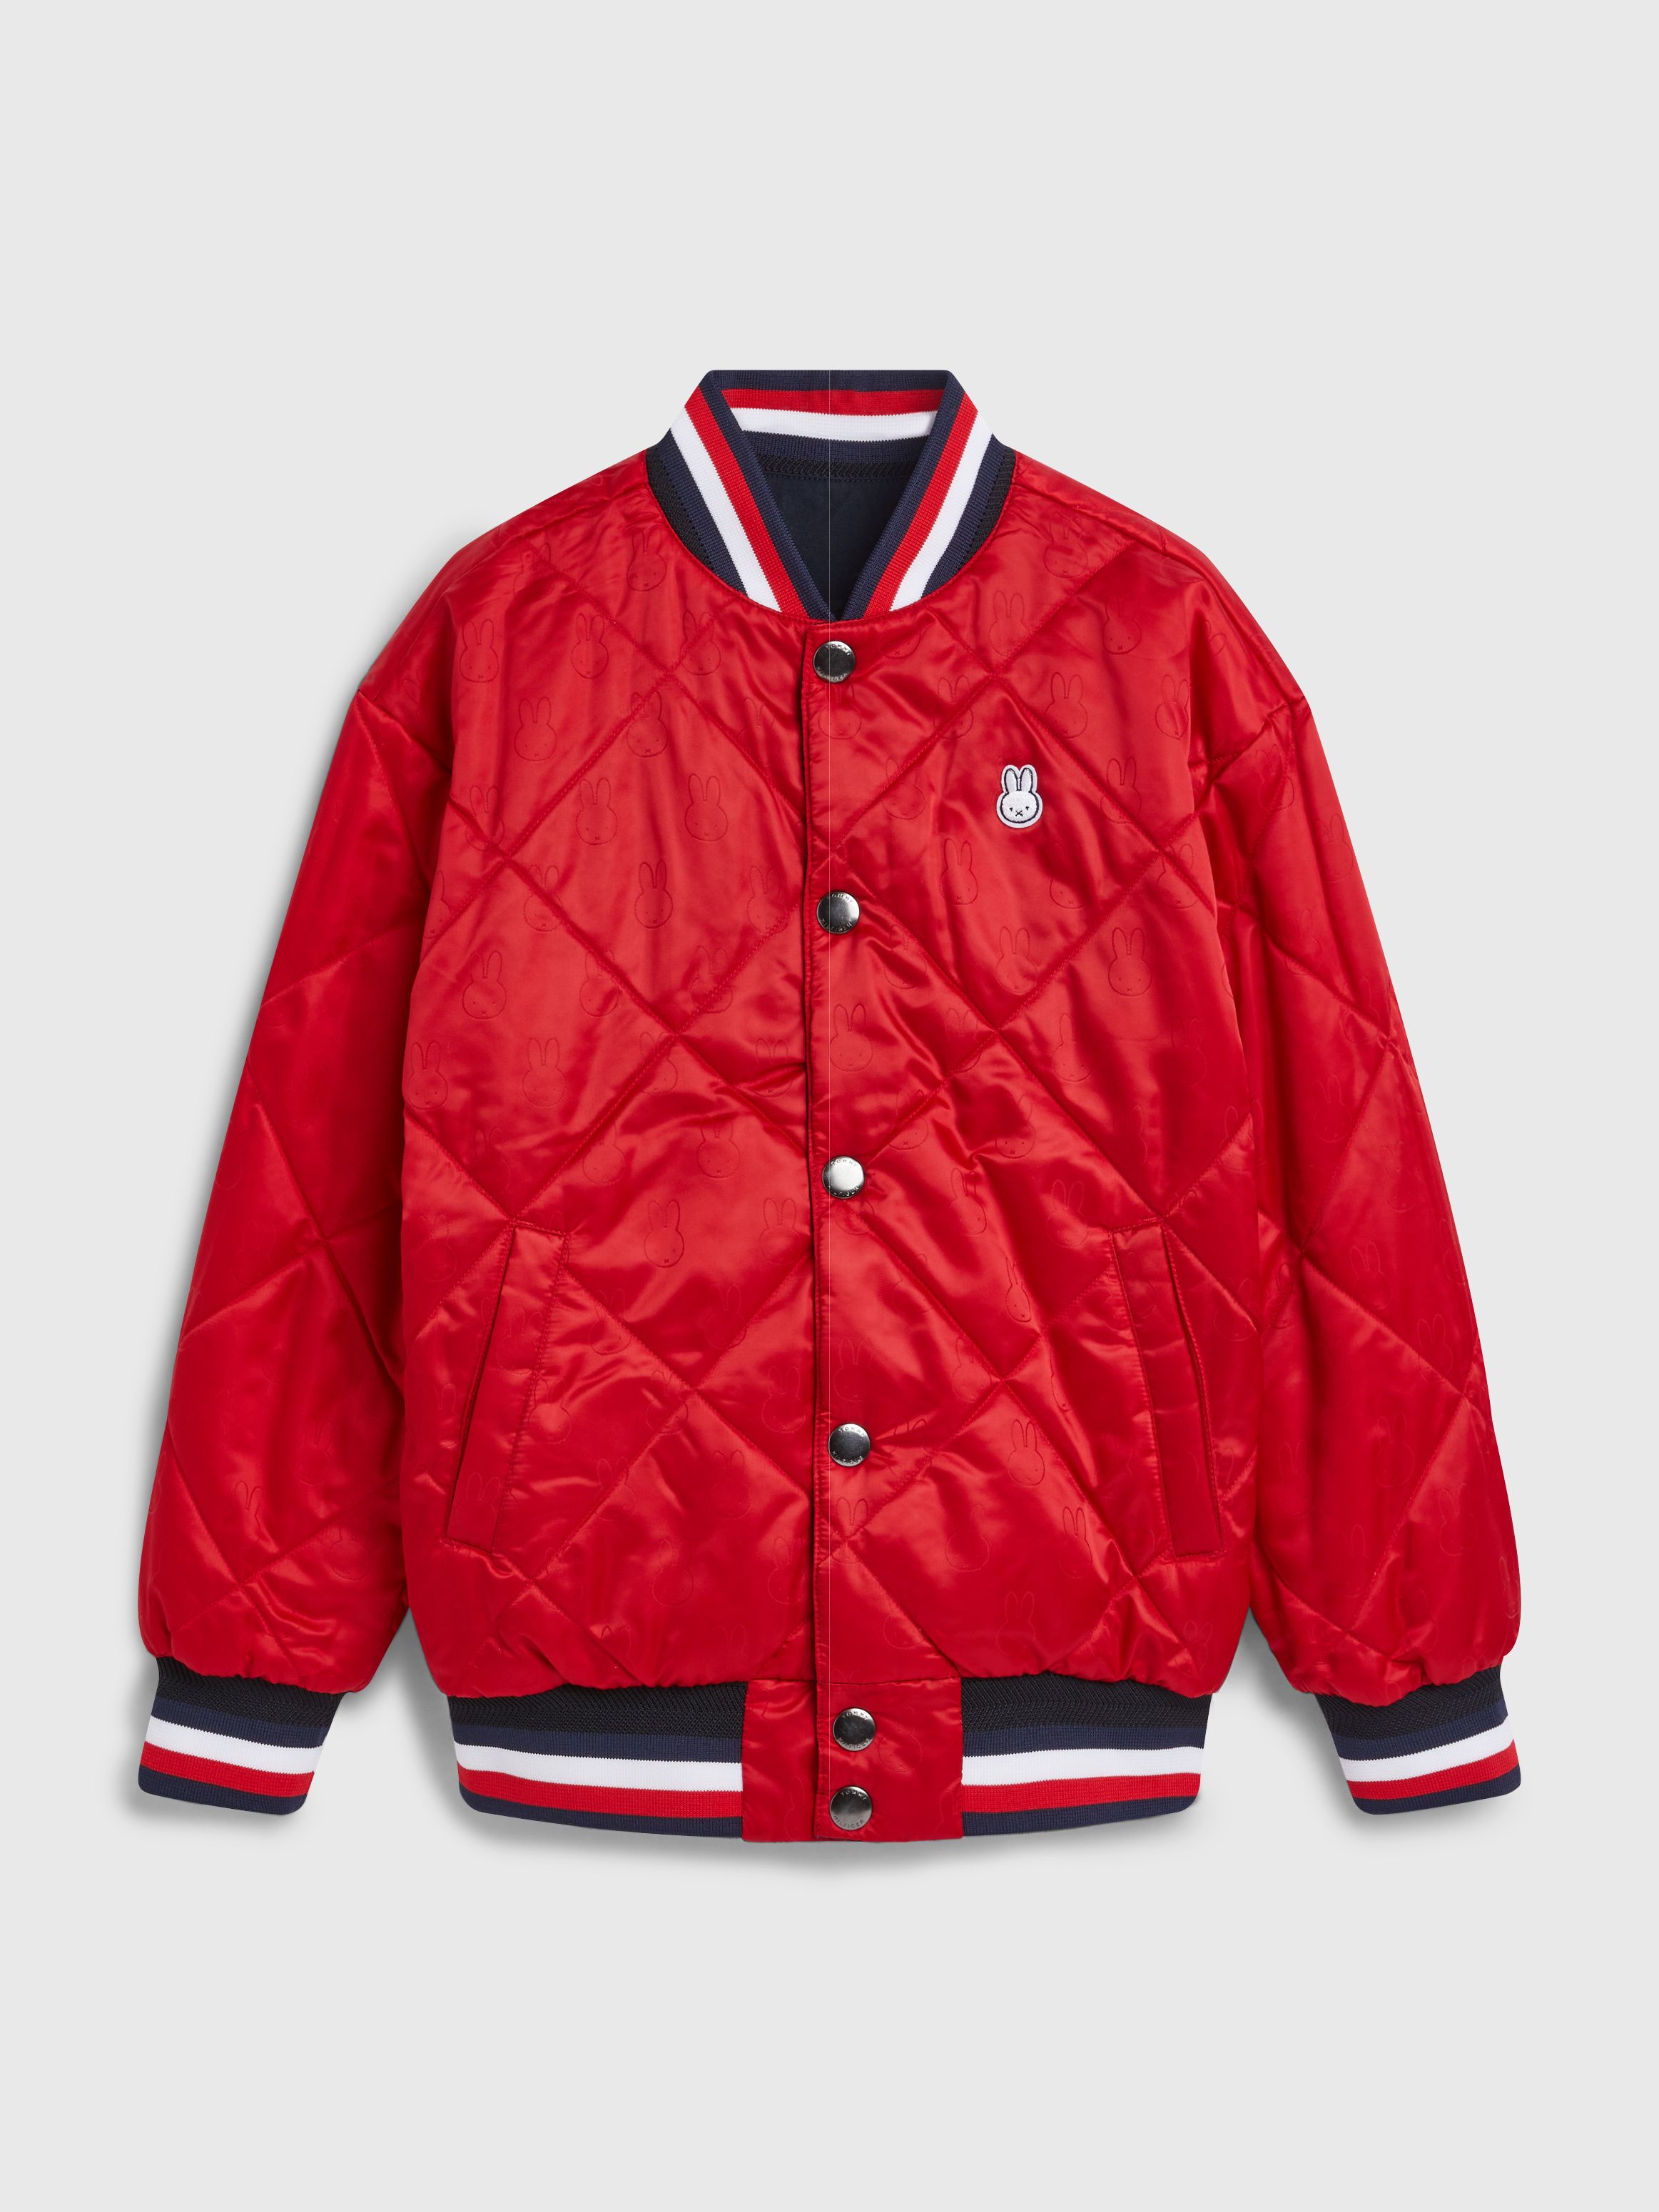 Tommy Hilfiger x Miffy Dual Gender Reversible Jacket